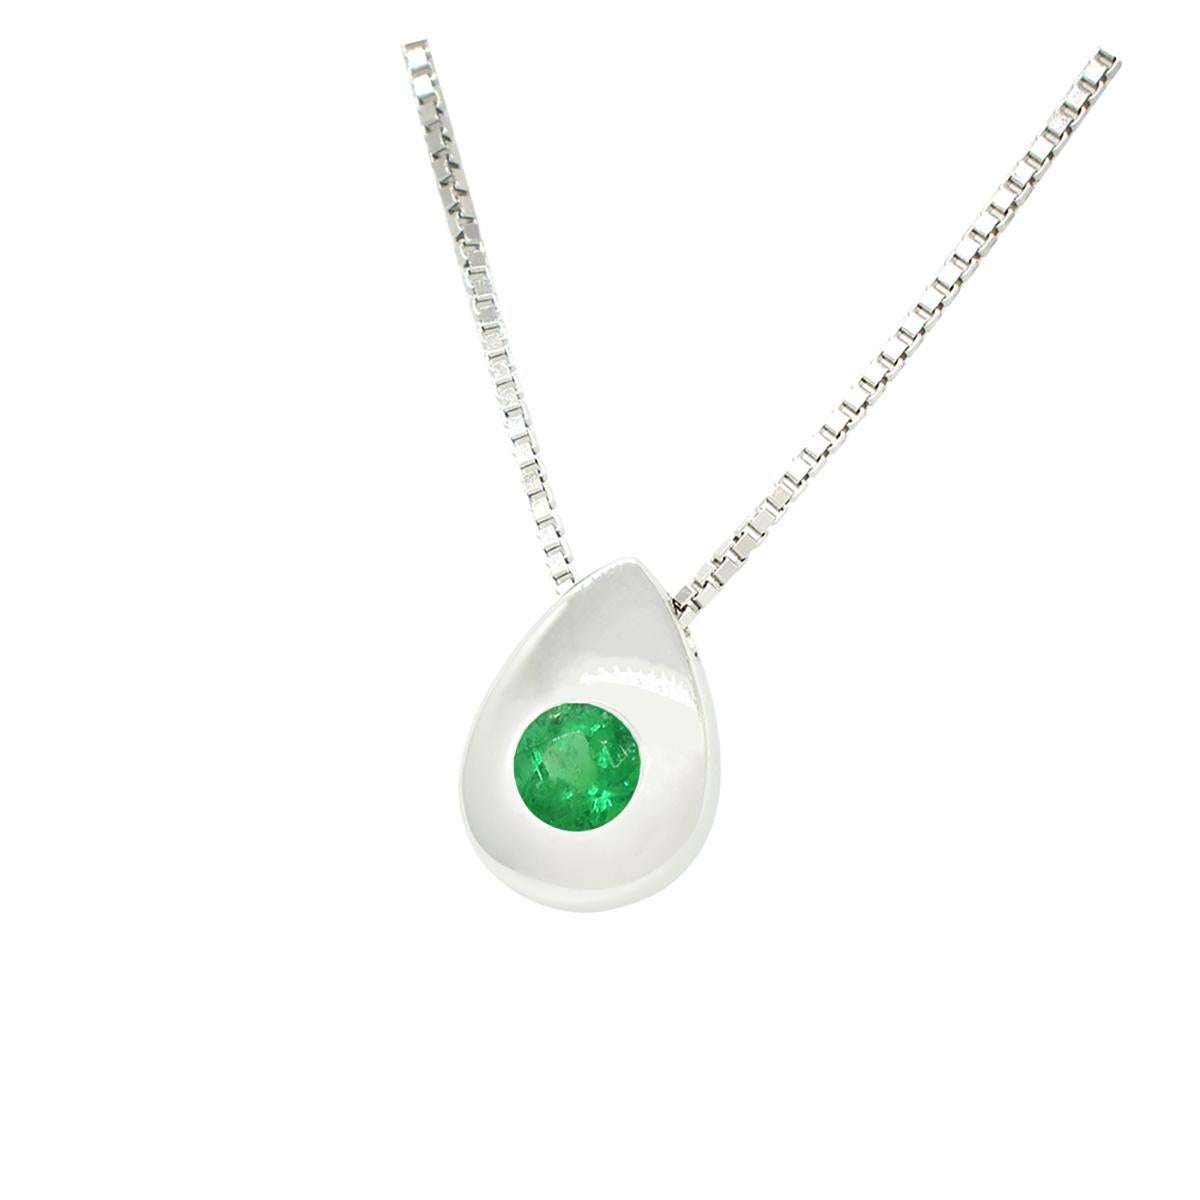 Rough Cut Solitaire Tear Drop Emerald Necklace in White Gold Bezel Set Colombian Emerald For Sale